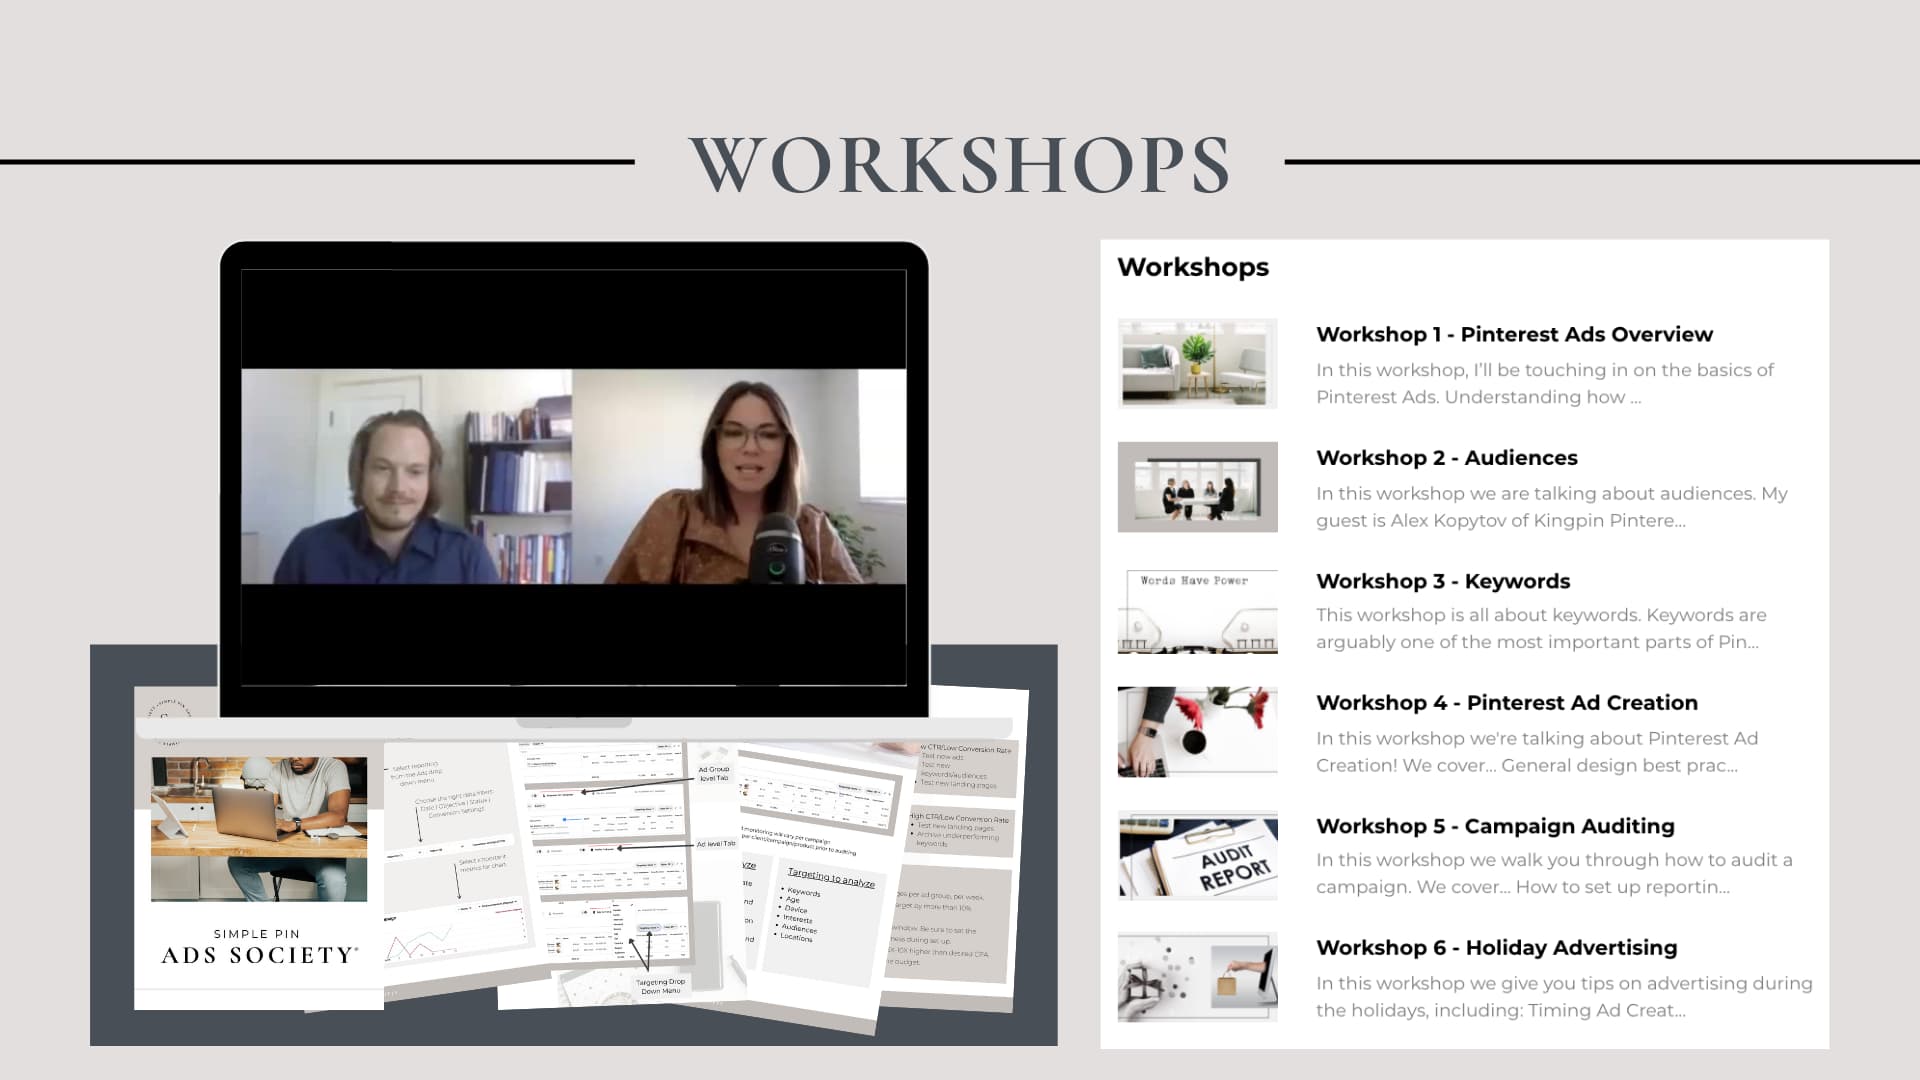 Screen capture of a Zoom meeting with two people, worksheets from the Ad Society class, and a screenshot of the lists of workshops from Simple Pin's Ad Society.